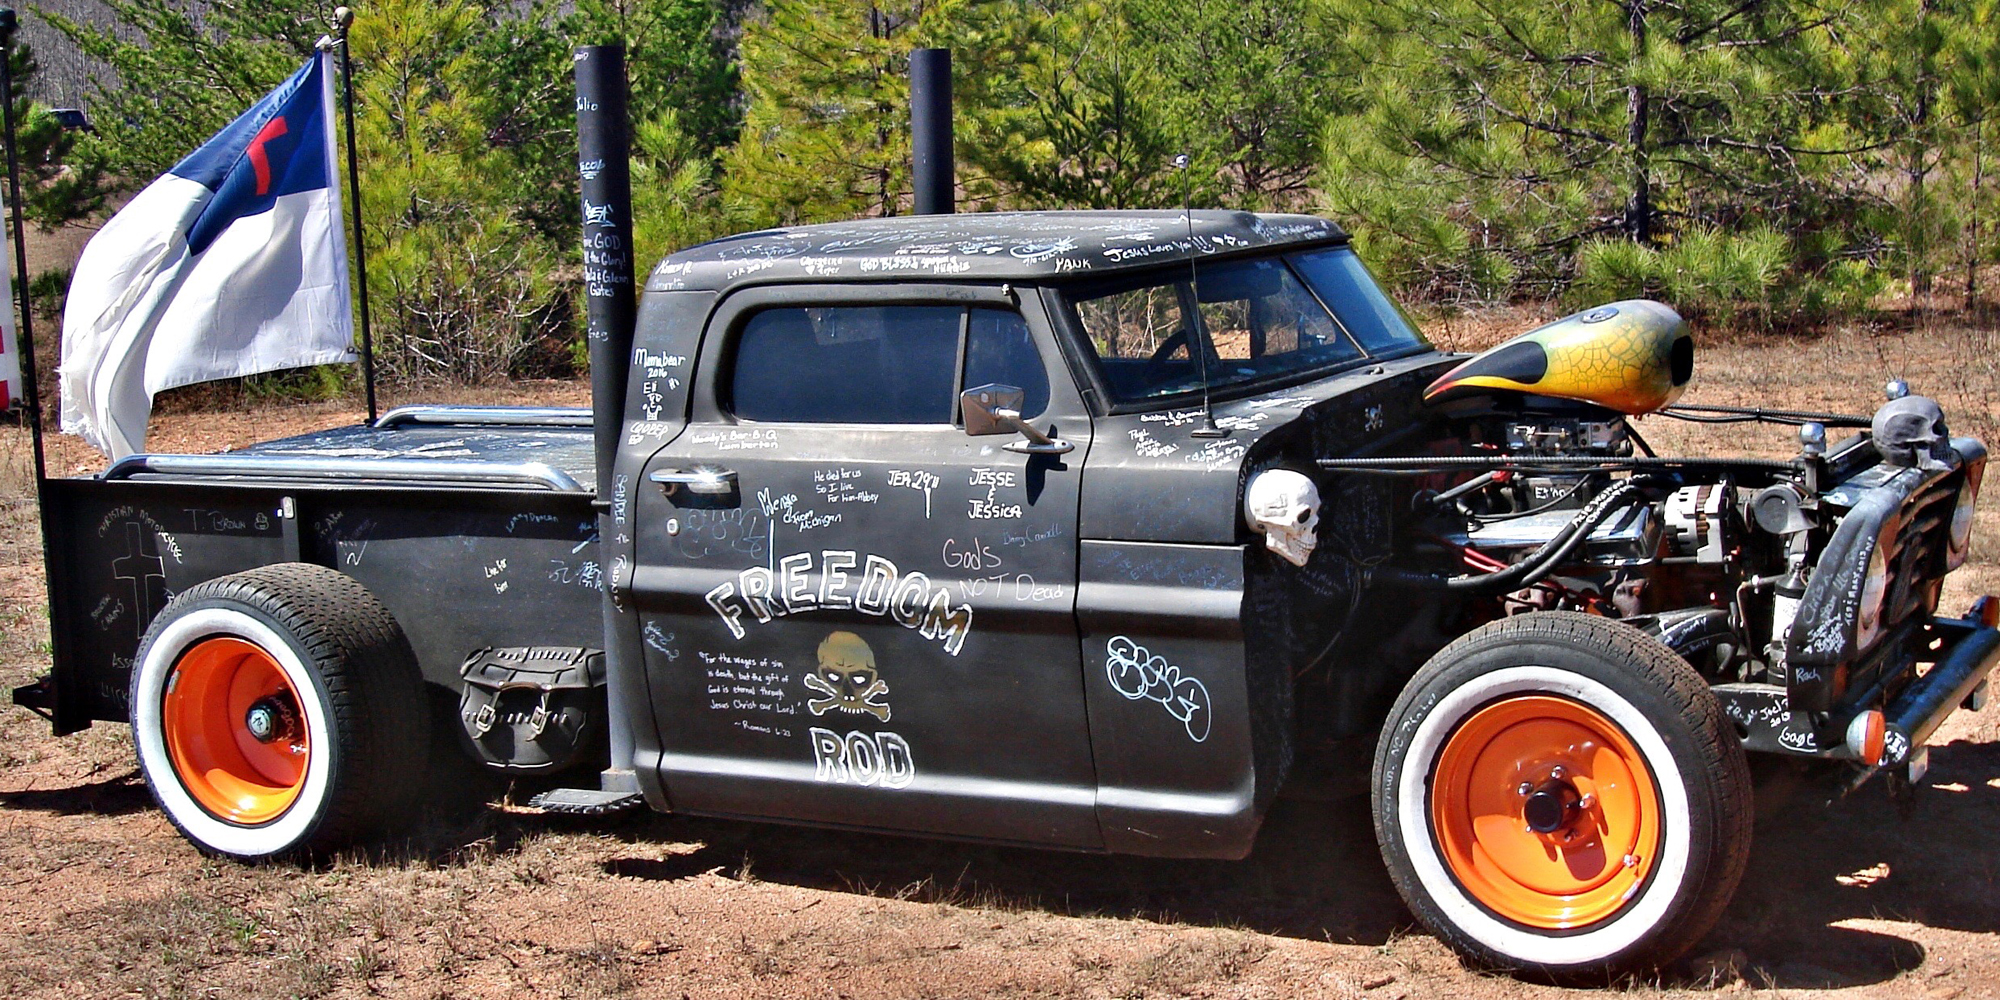 1968 Ford F-100 with U.S. Wheel Rat Rod (Series 69) Extended Sizing.